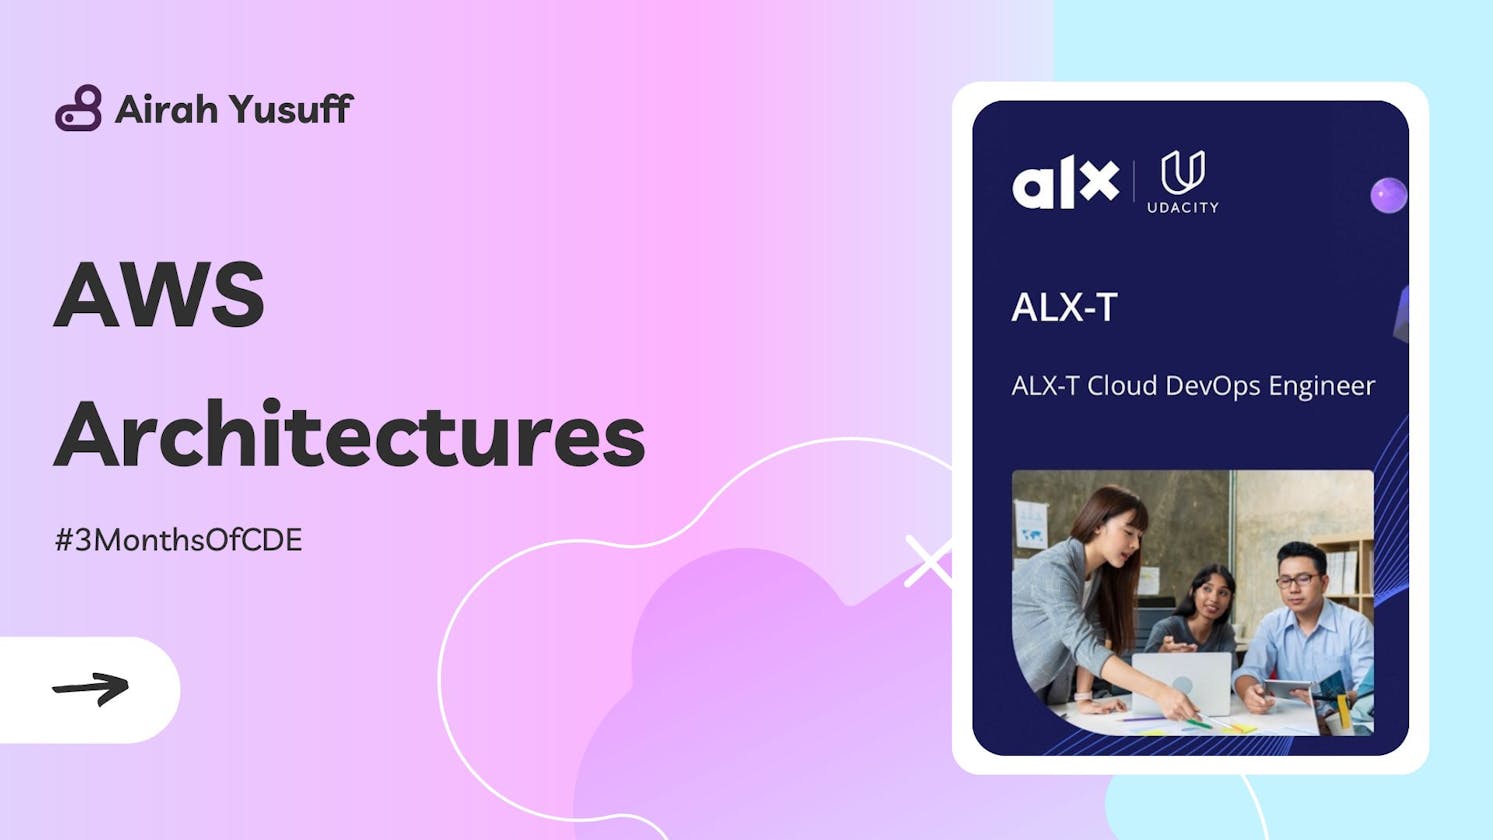 Week 5 - More on AWS: Architectures